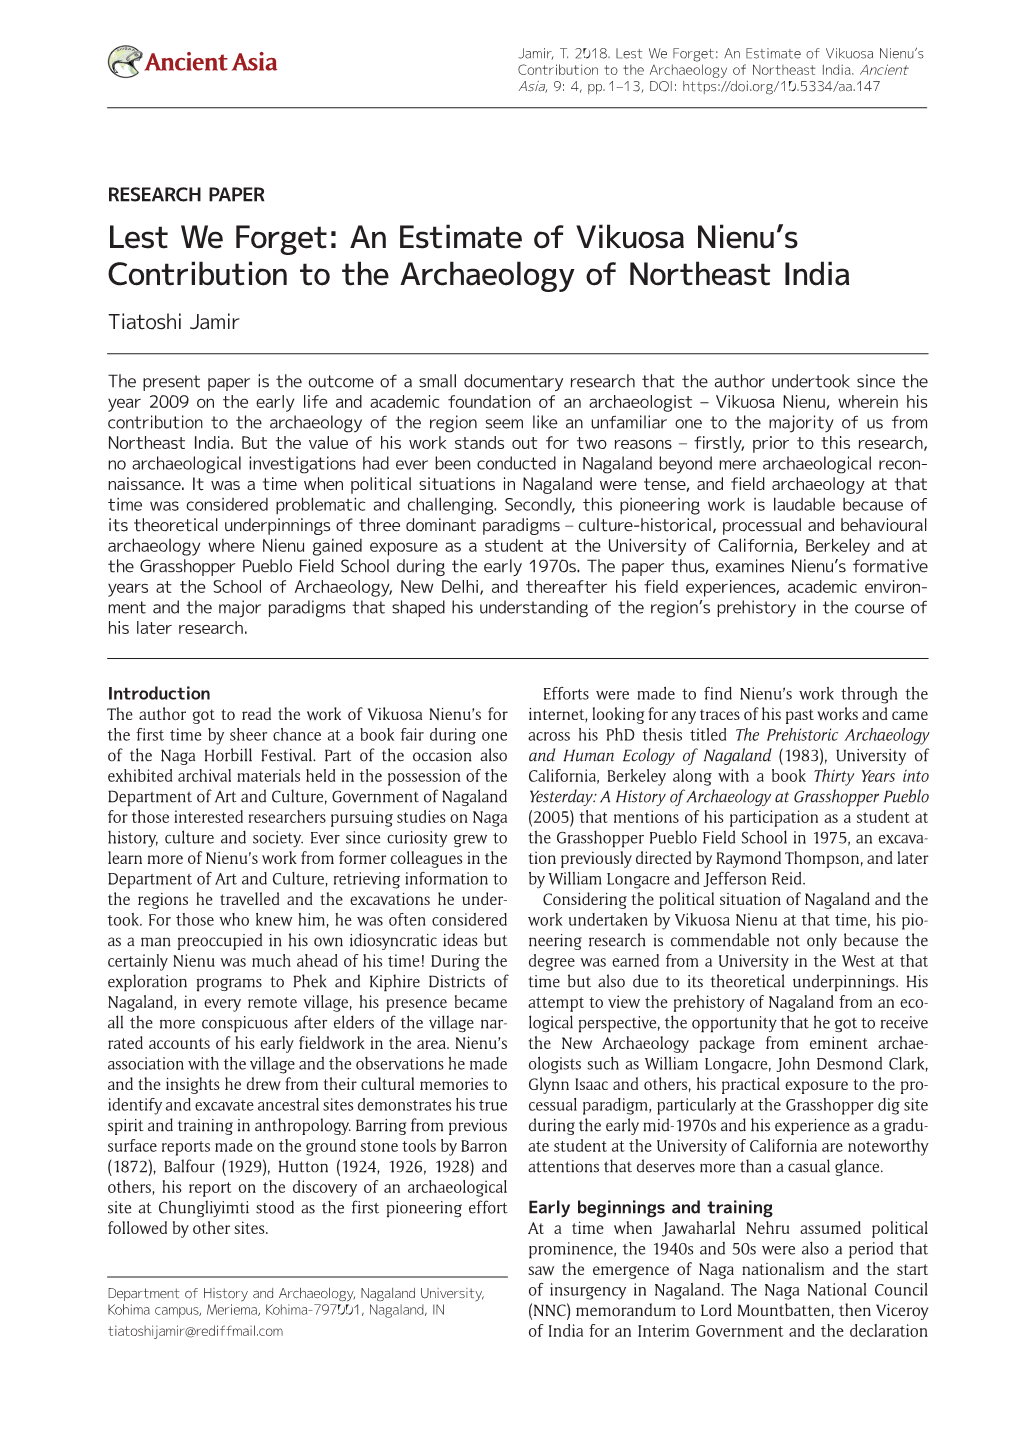 An Estimate of Vikuosa Nienu's Contribution to the Archaeology Of